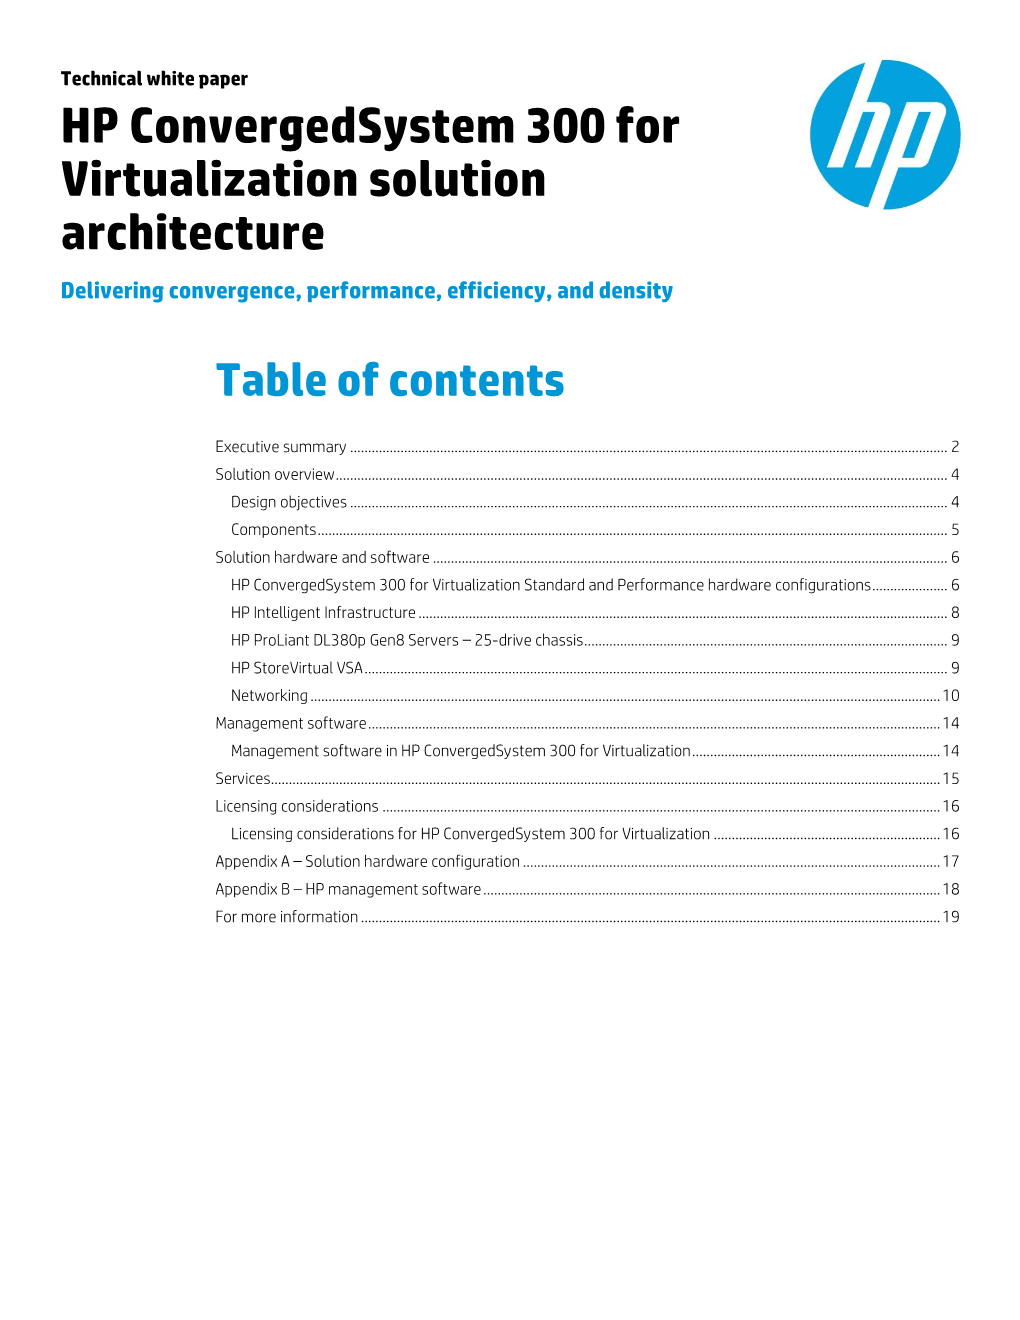 HP Convergedsystem 300 for Virtualization Solution Architecture Delivering Convergence, Performance, Efficiency, and Density